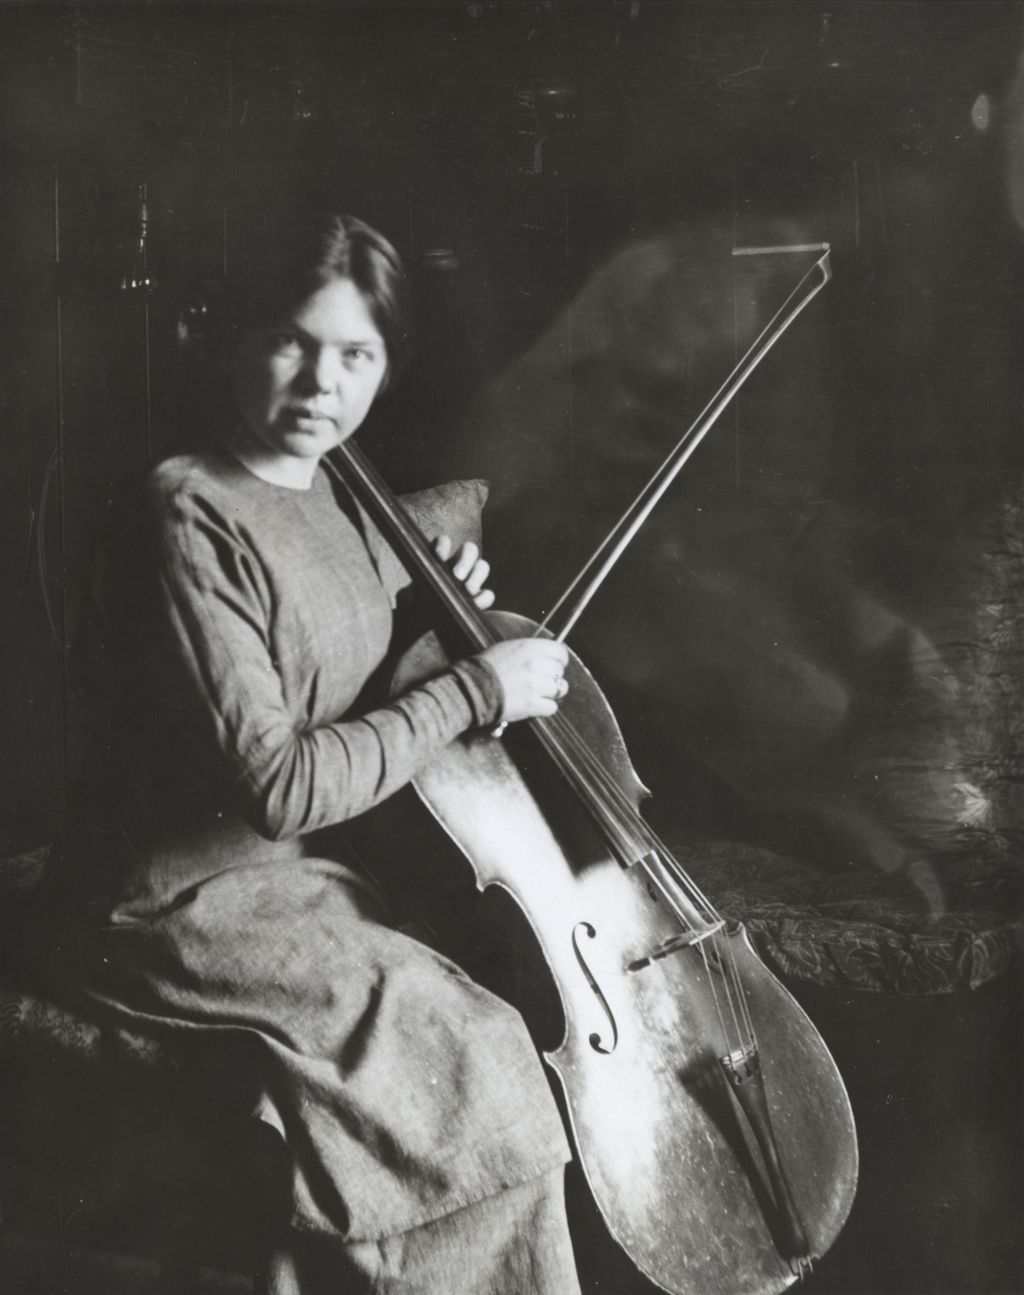 Miniature of Hull-House resident and cellist Vera Poppe holding a cello